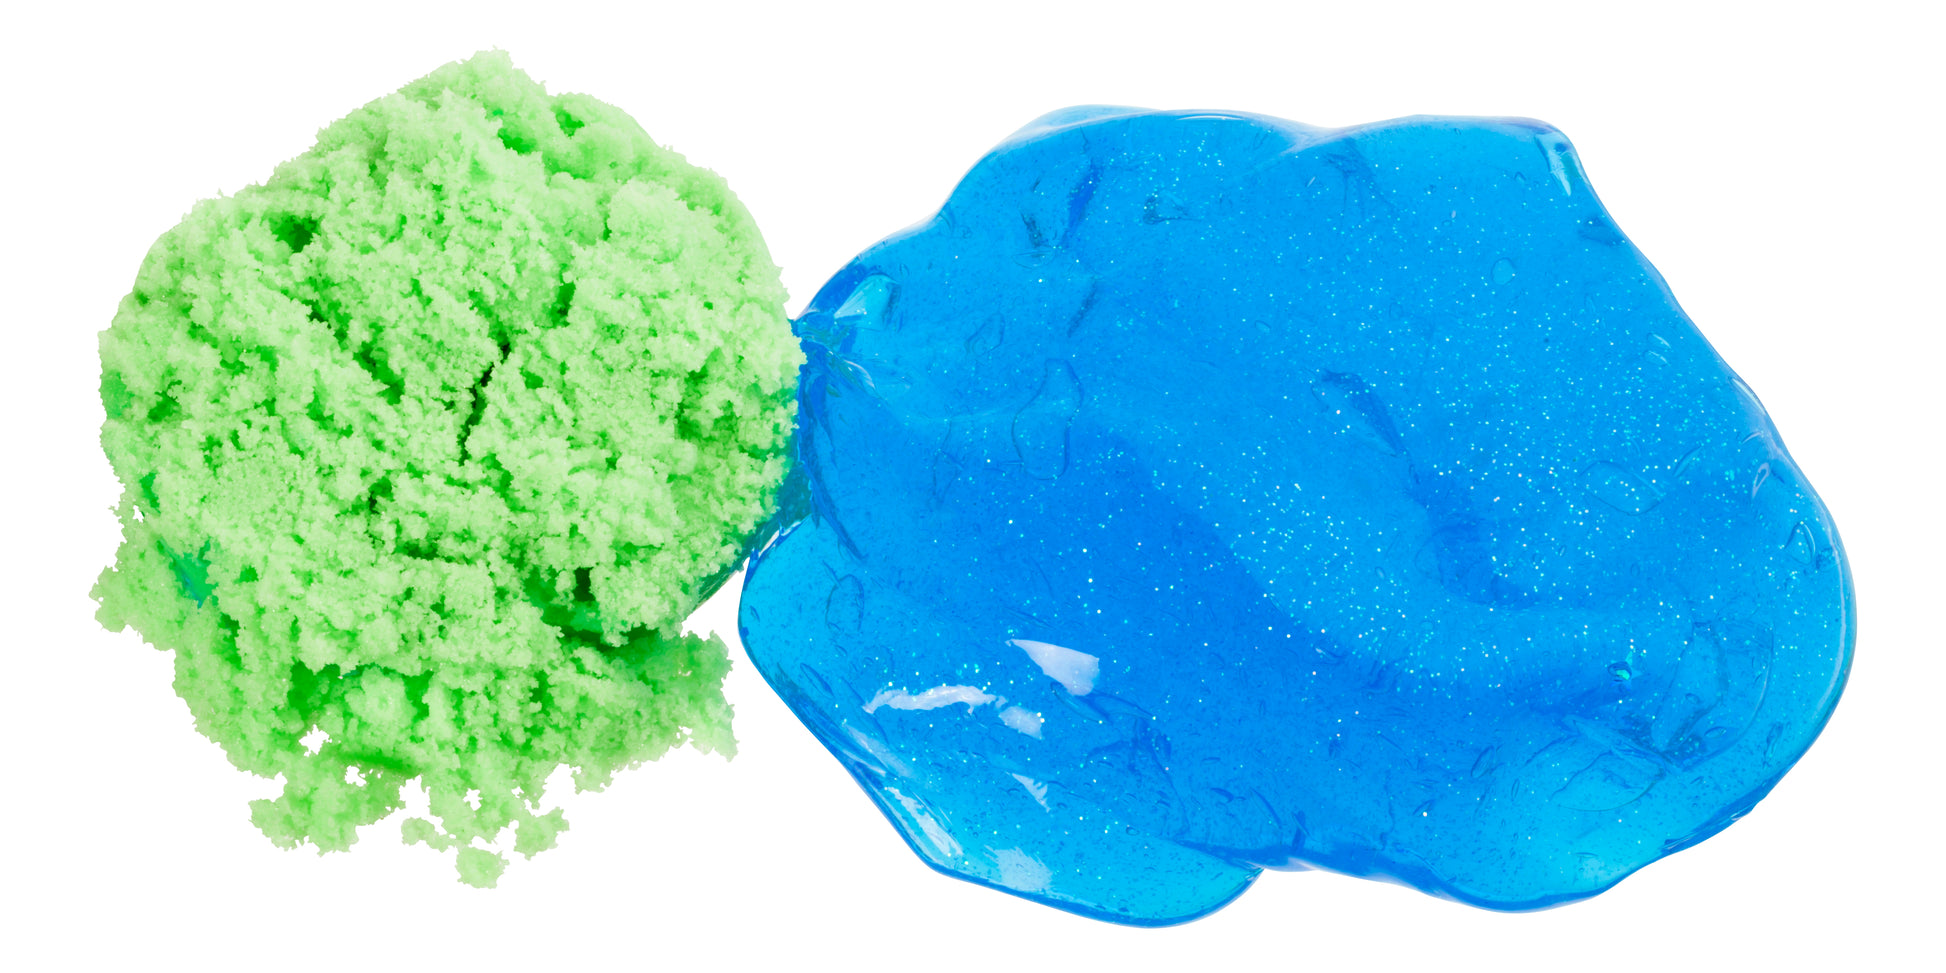 Toysmith Space Scape Slime